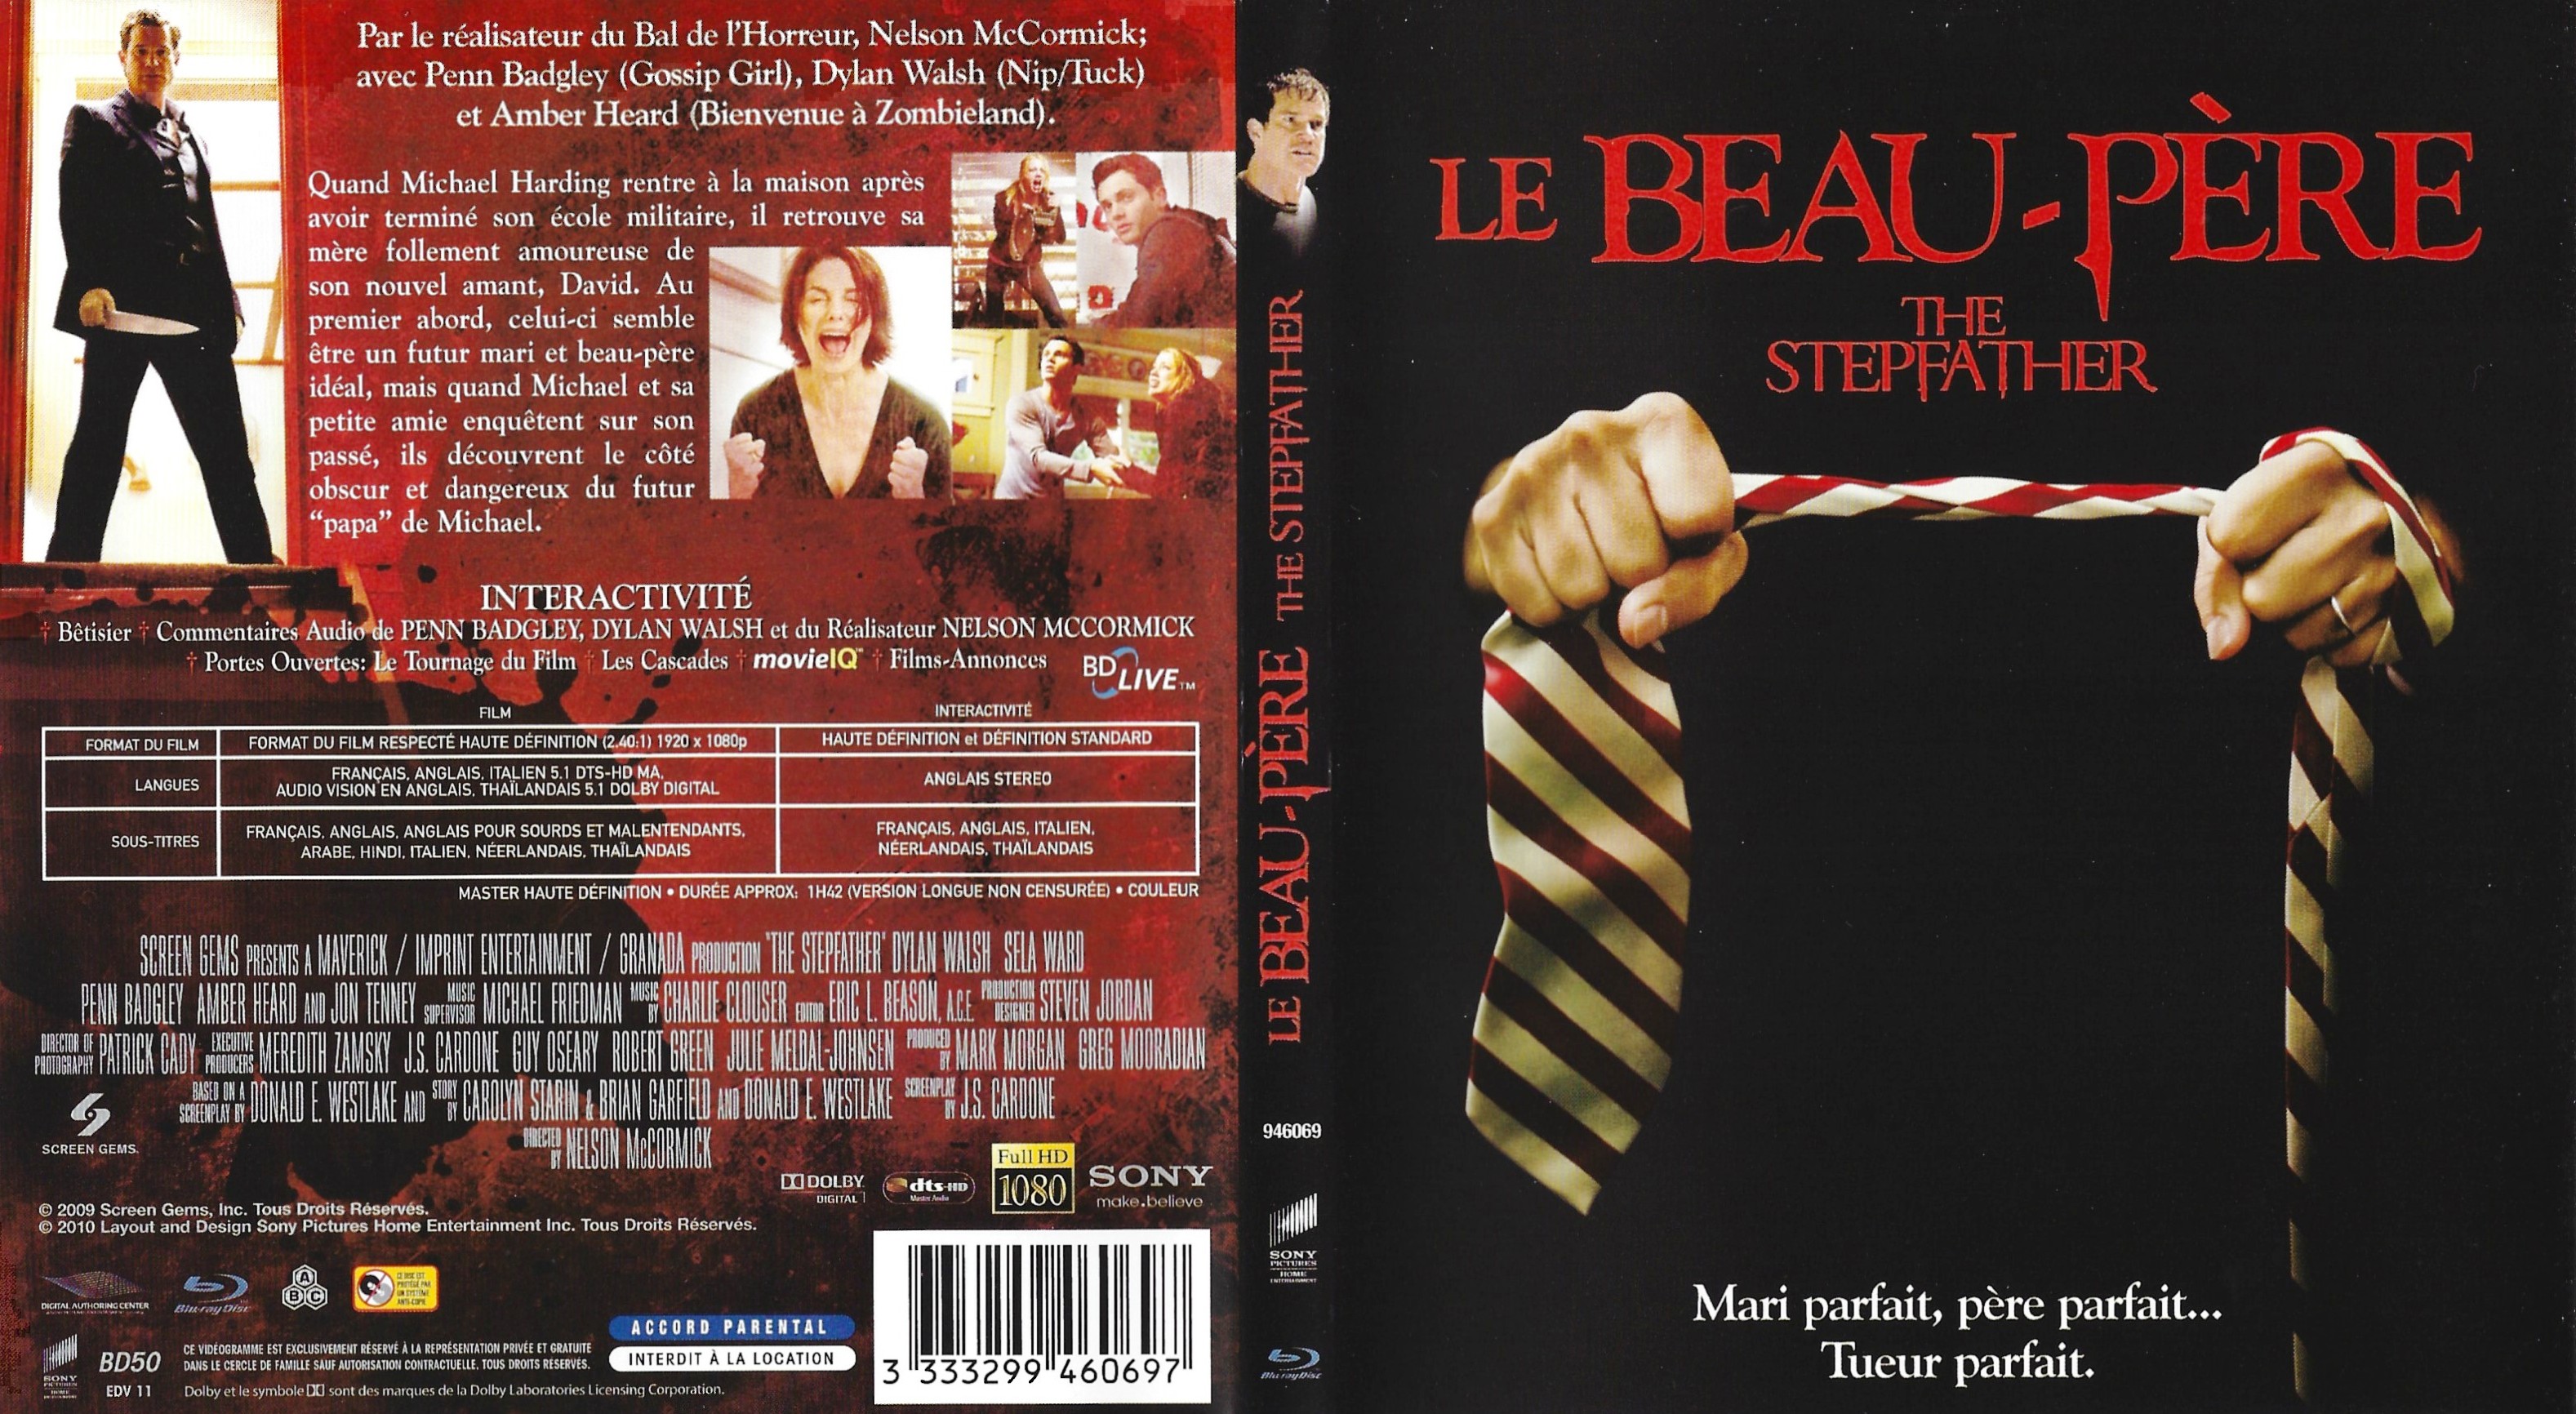 Jaquette DVD Le beau-pere - The stepfather (BLU-RAY)